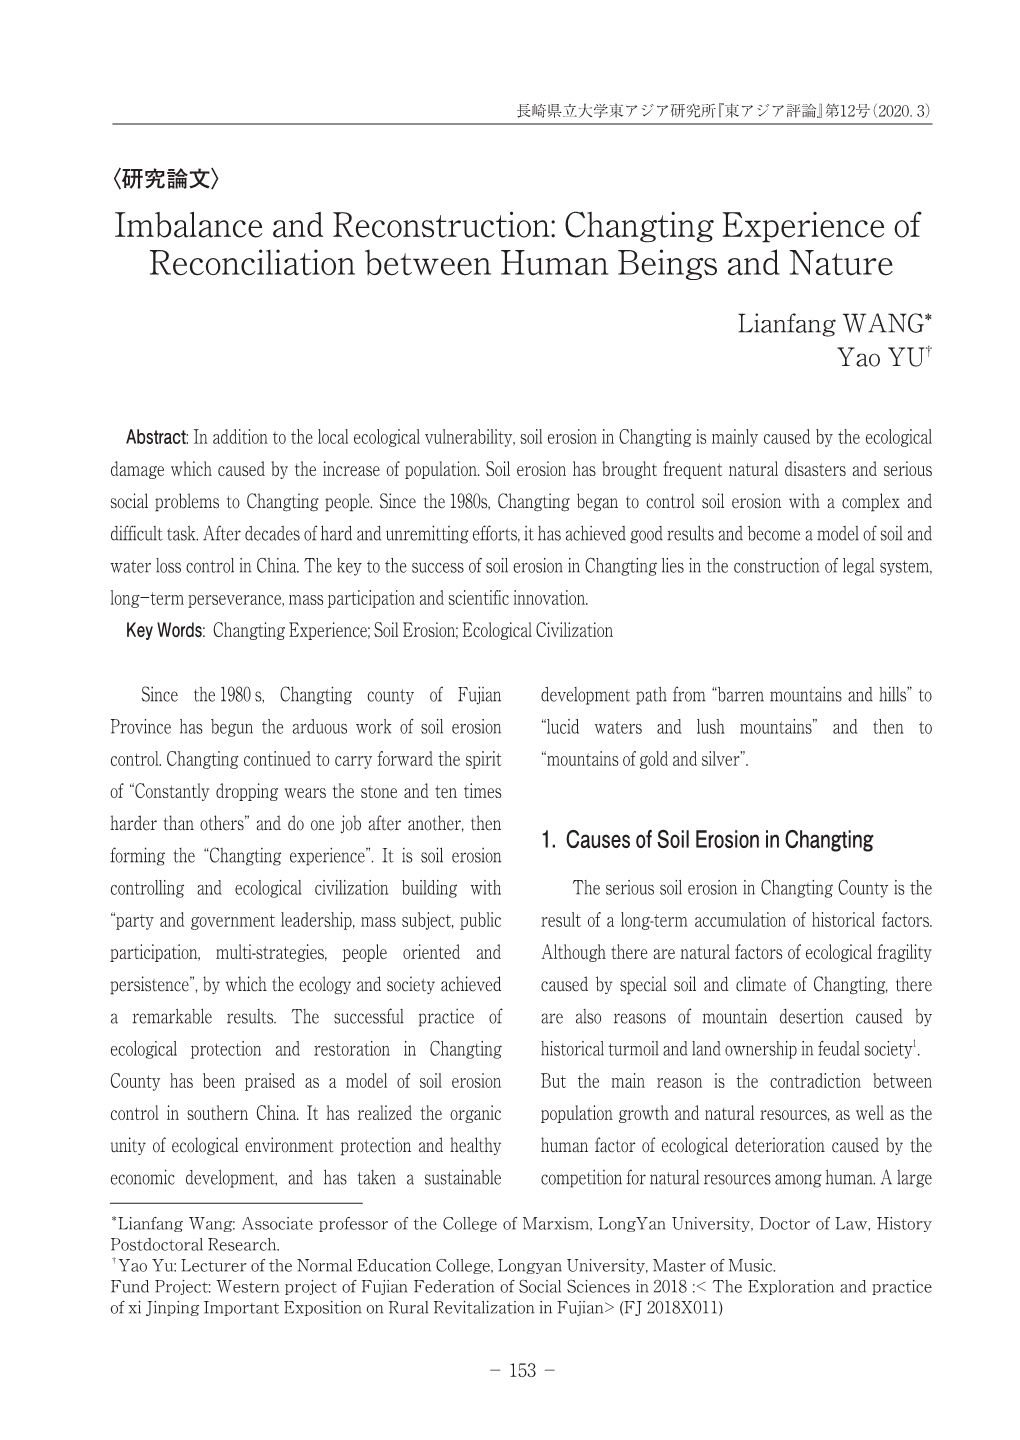 Imbalance and Reconstruction: Changting Experience of Reconciliation Between Human Beings and Nature